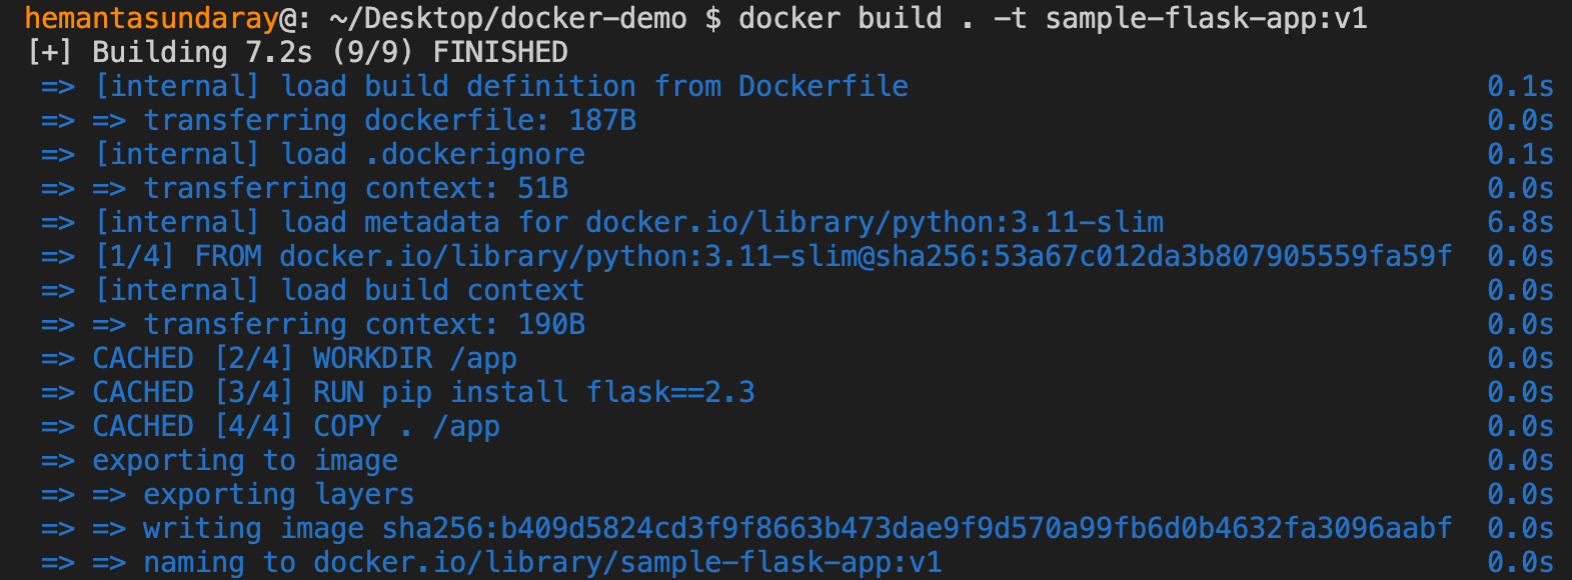 How to Build a Docker Image With Dockerfile From Scratch